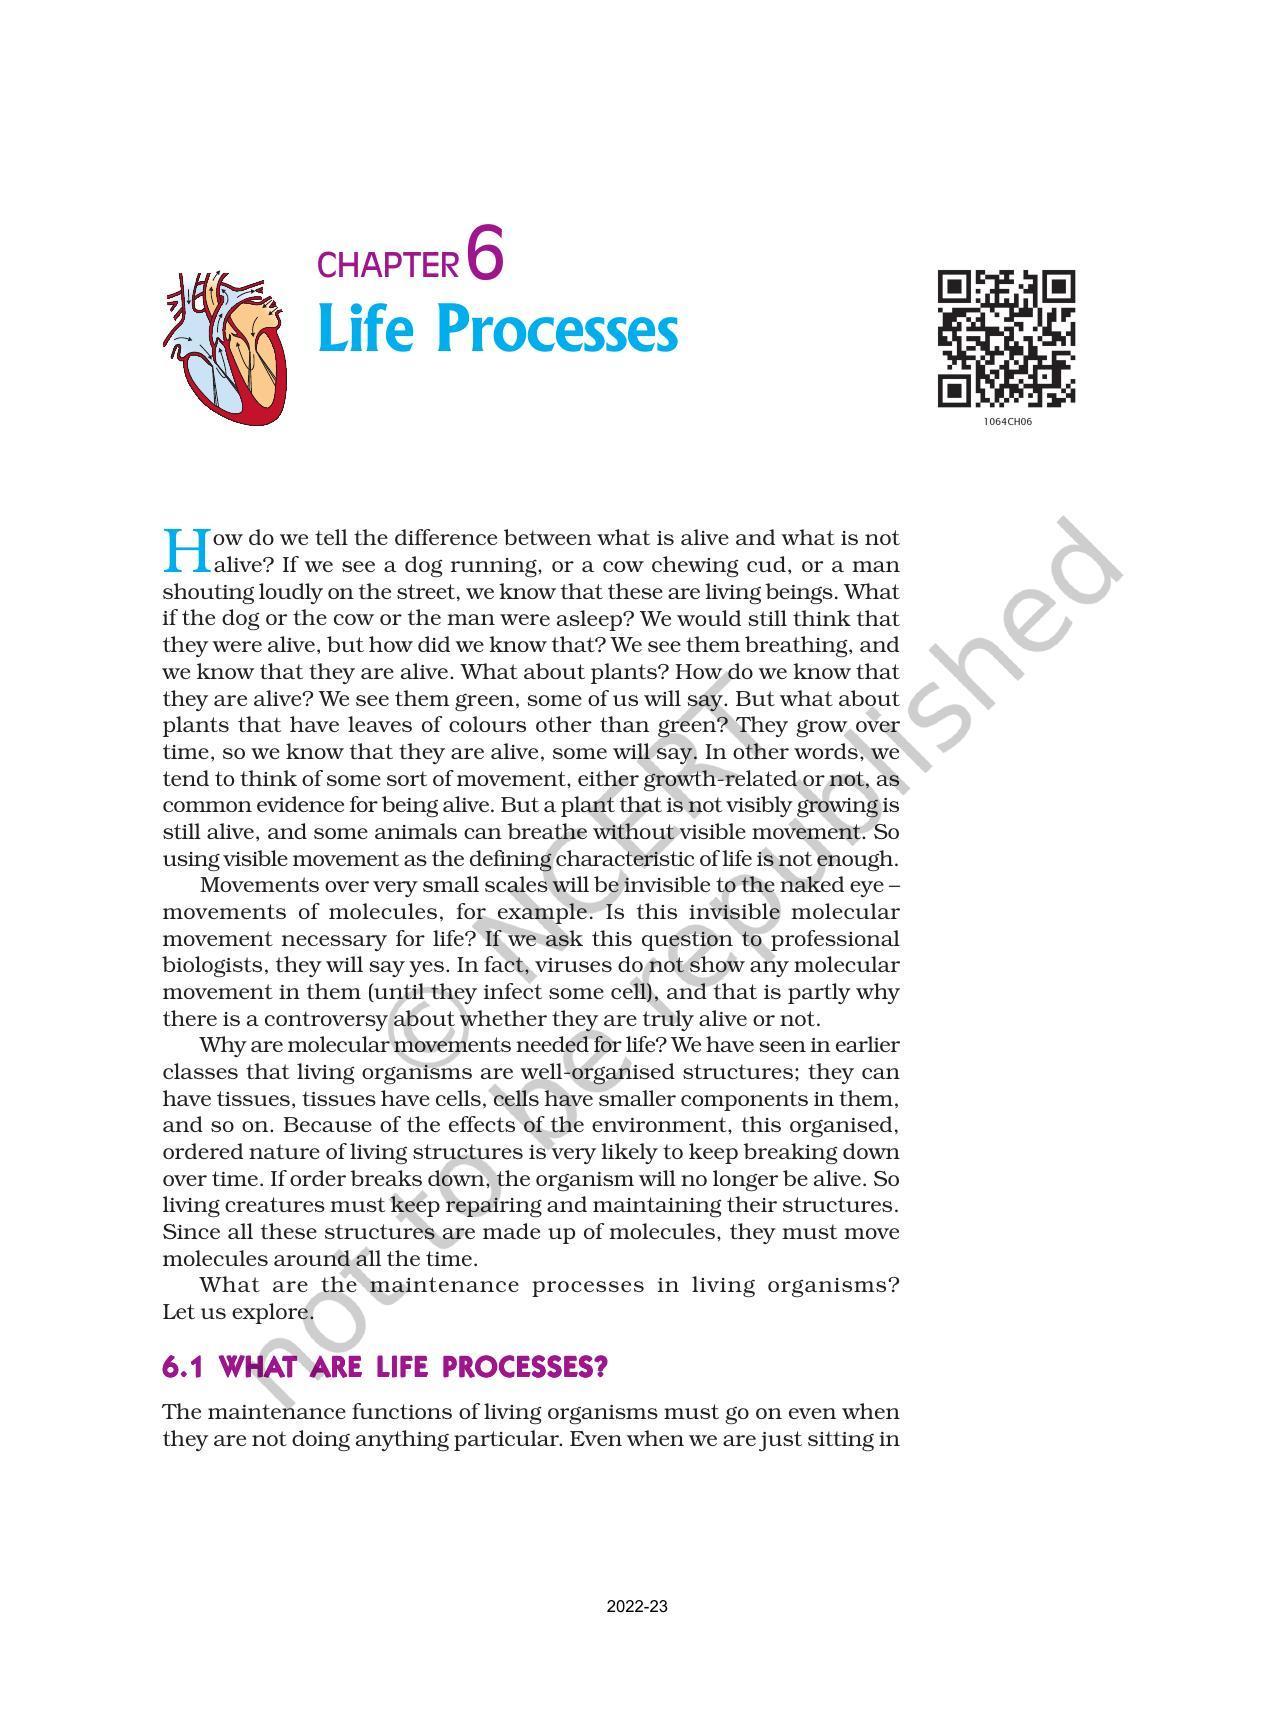 NCERT Book for Class 10 Science Chapter 6 Life Processes - Page 1